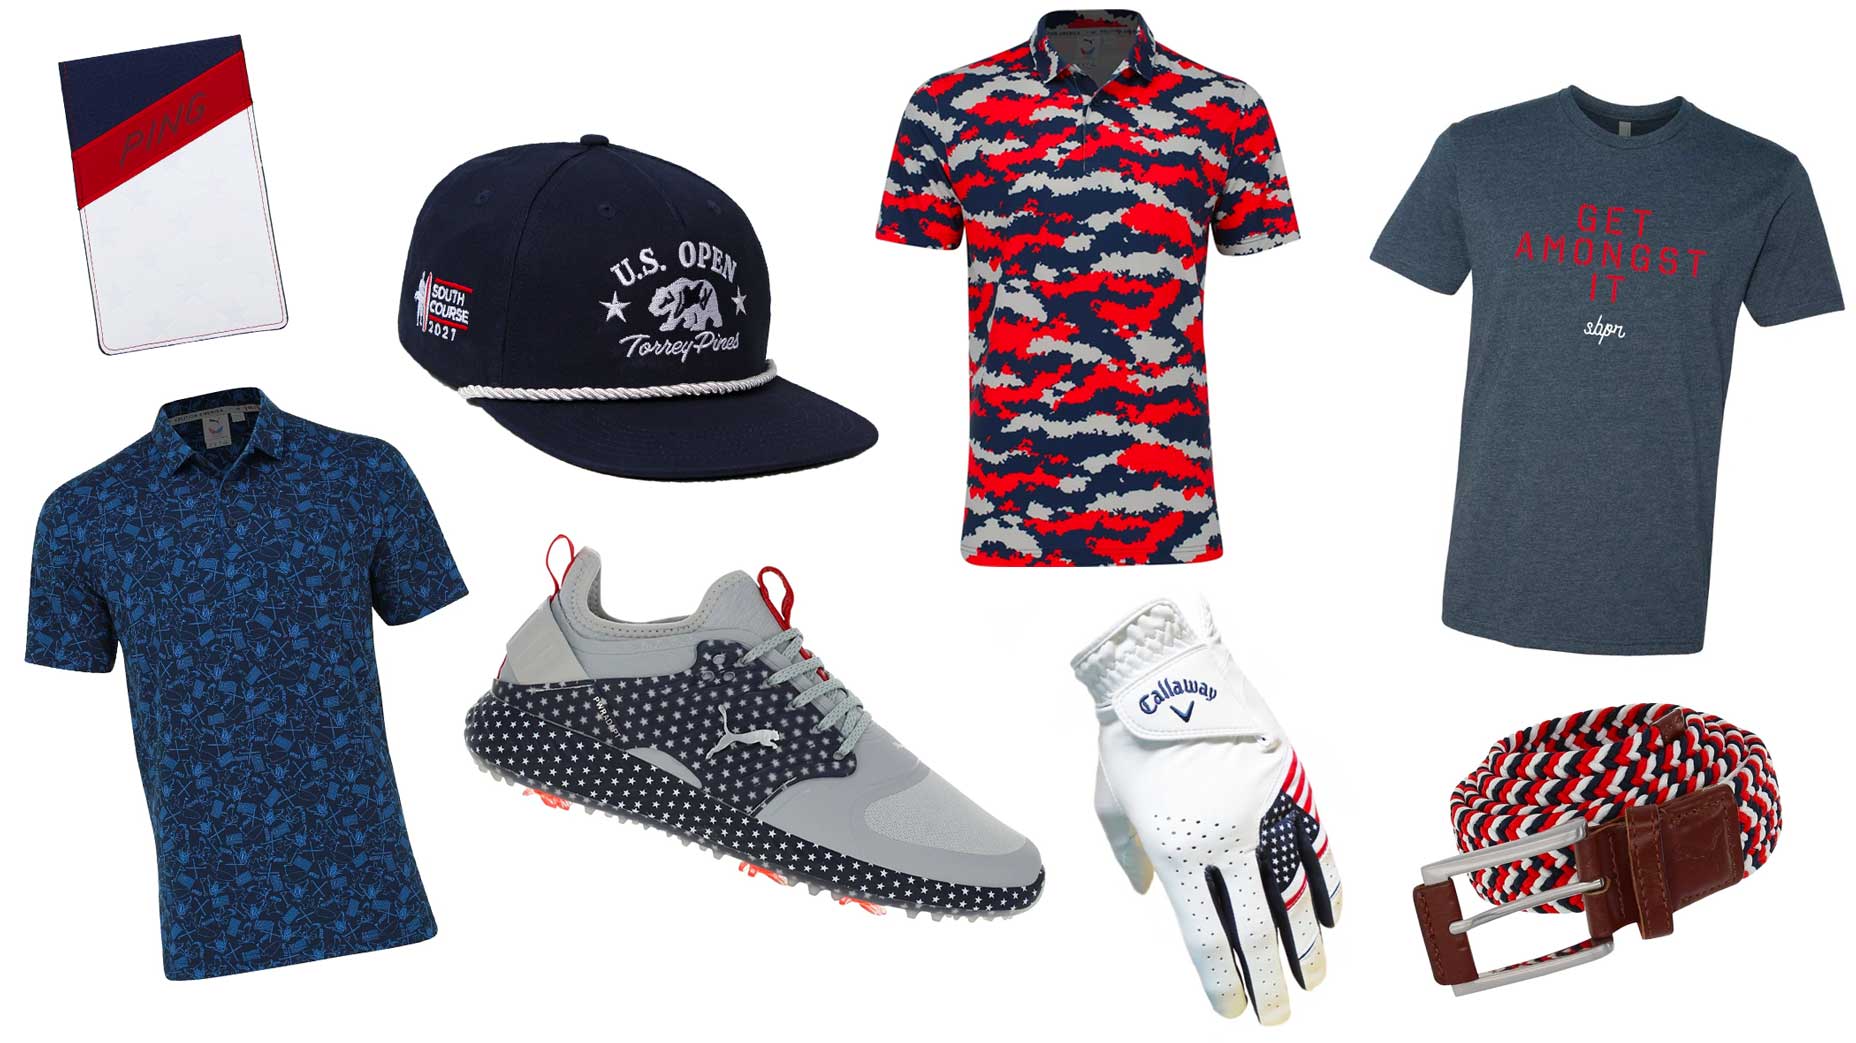 The best U.S. Open-themed gear you can buy in our Pro Shop